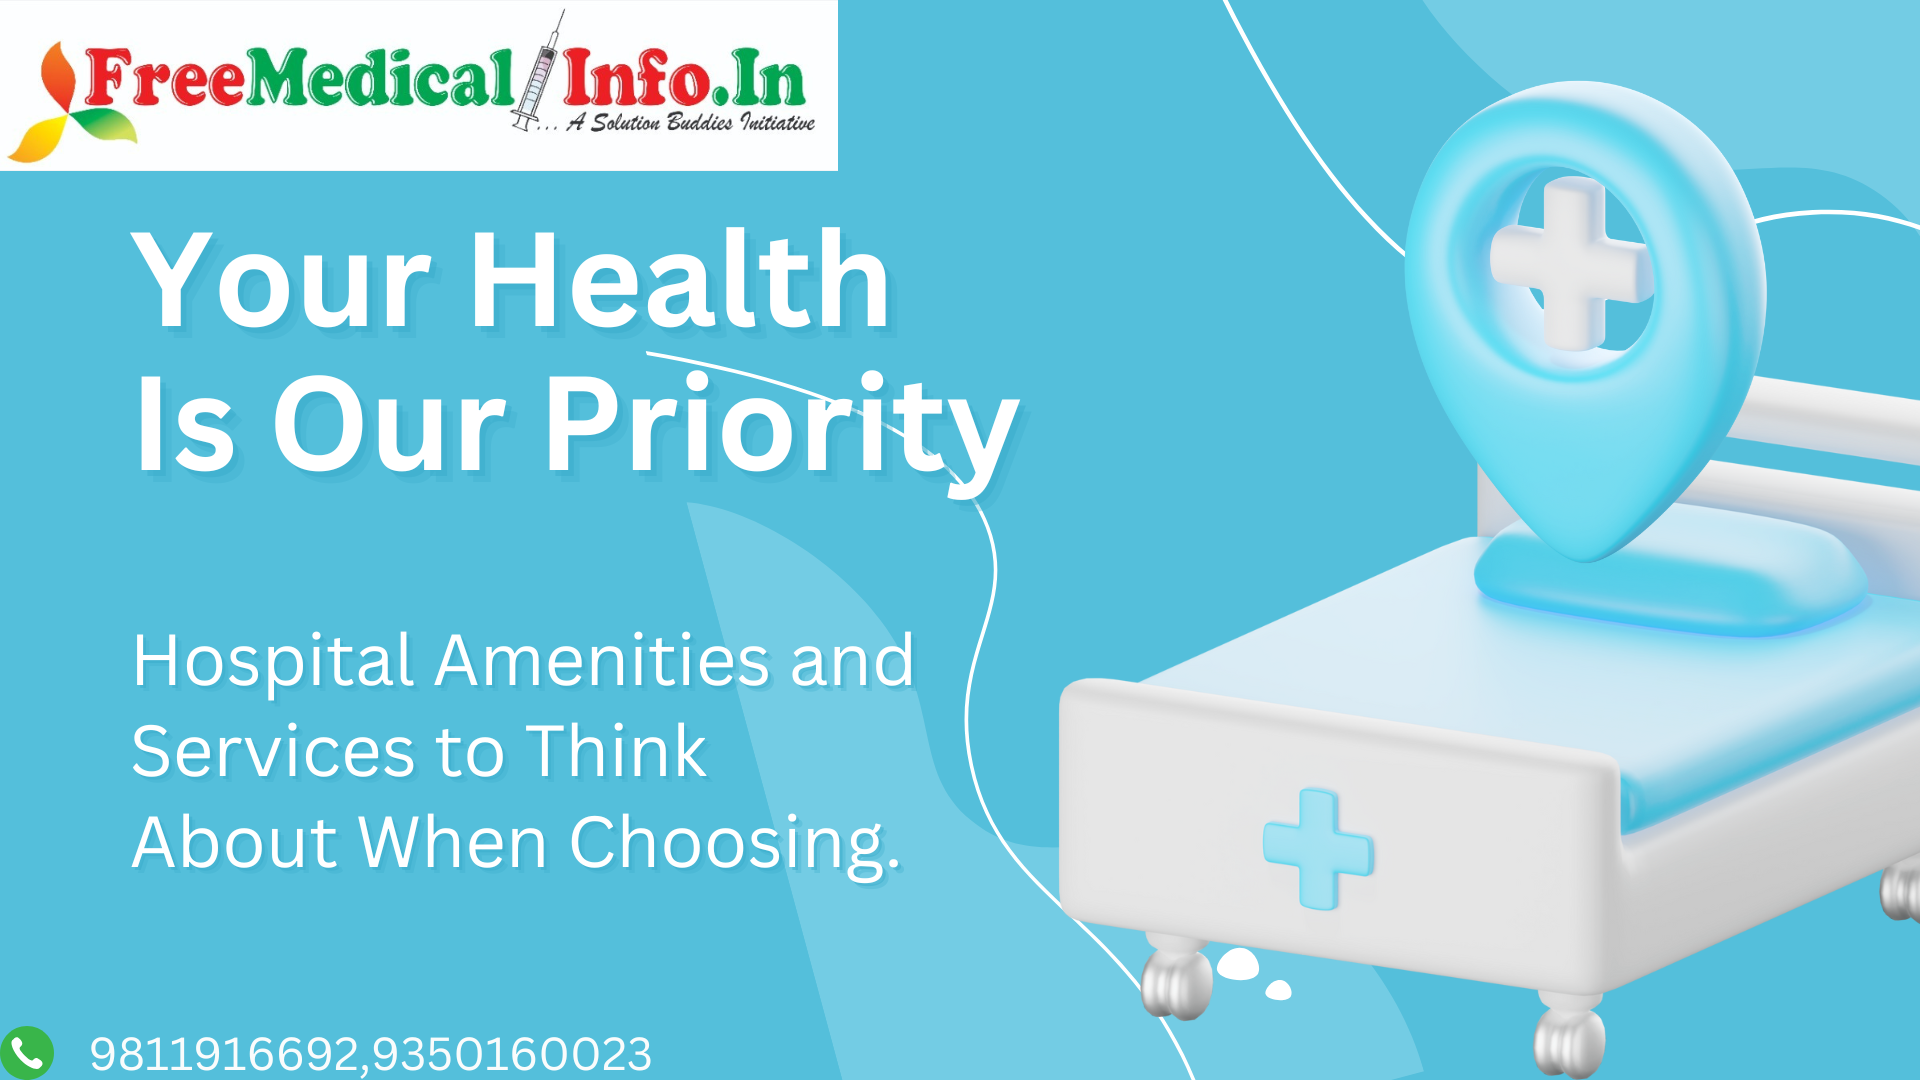 Hospital Amenities and Services: What to Consider When Choosing a Facility